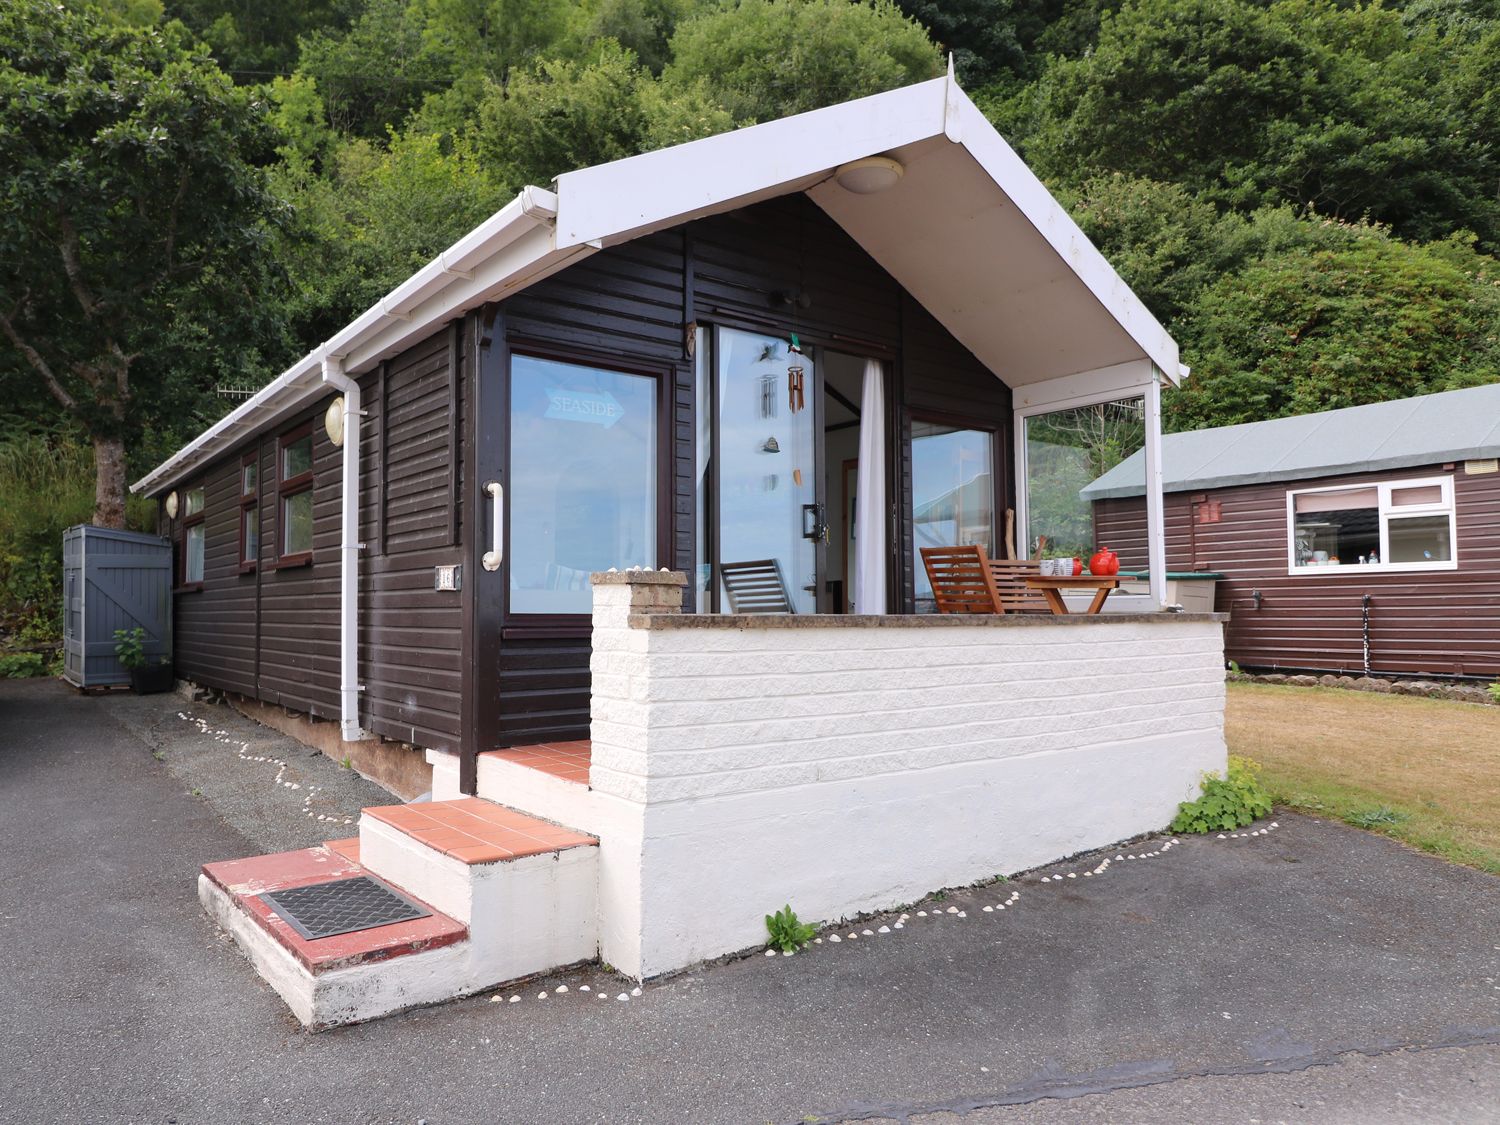 Captain's Cabin - Mid Wales - 987181 - photo 1